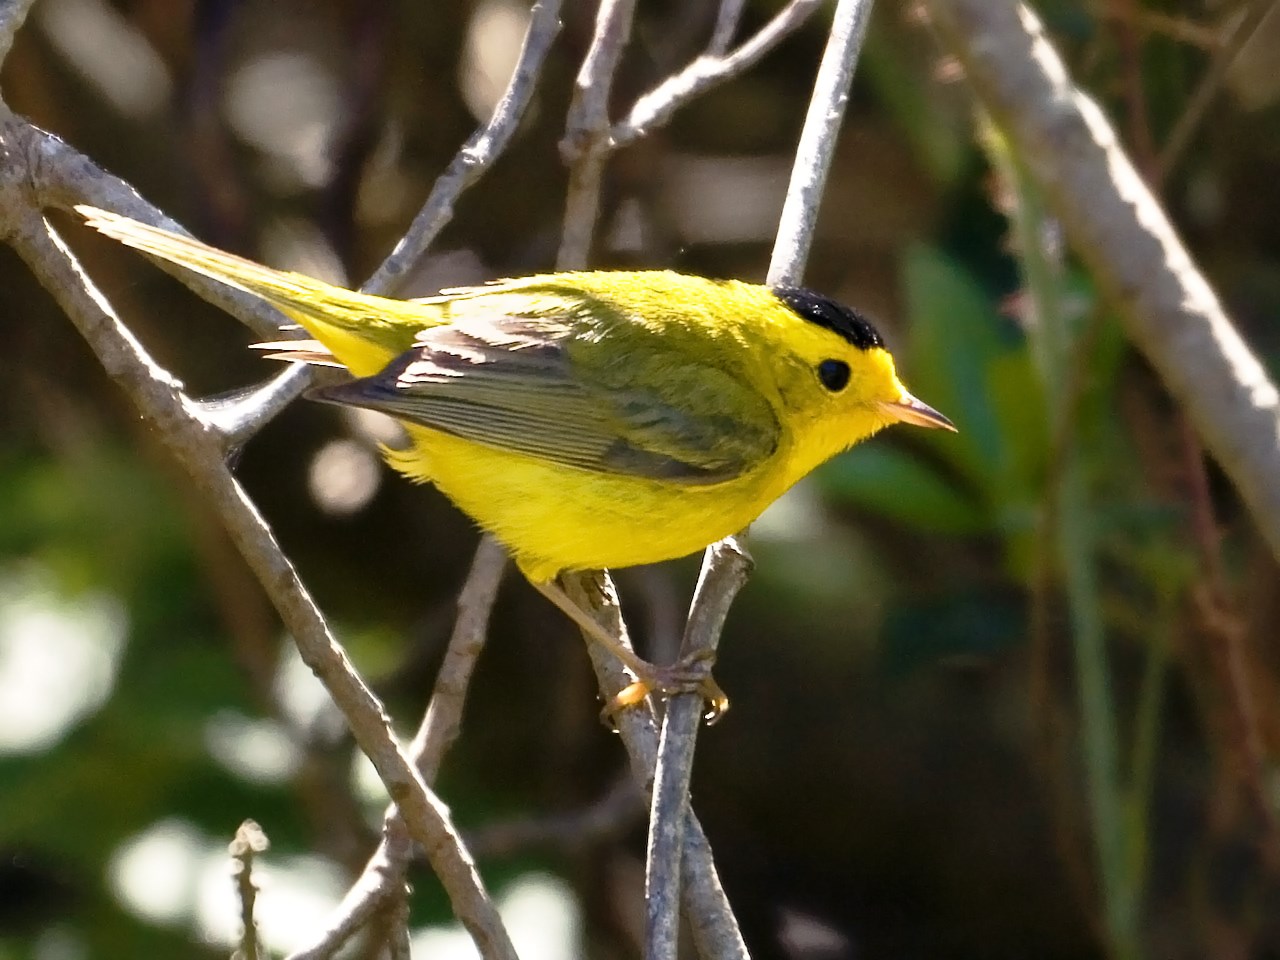 Wilsons's Warbler perches on a branch